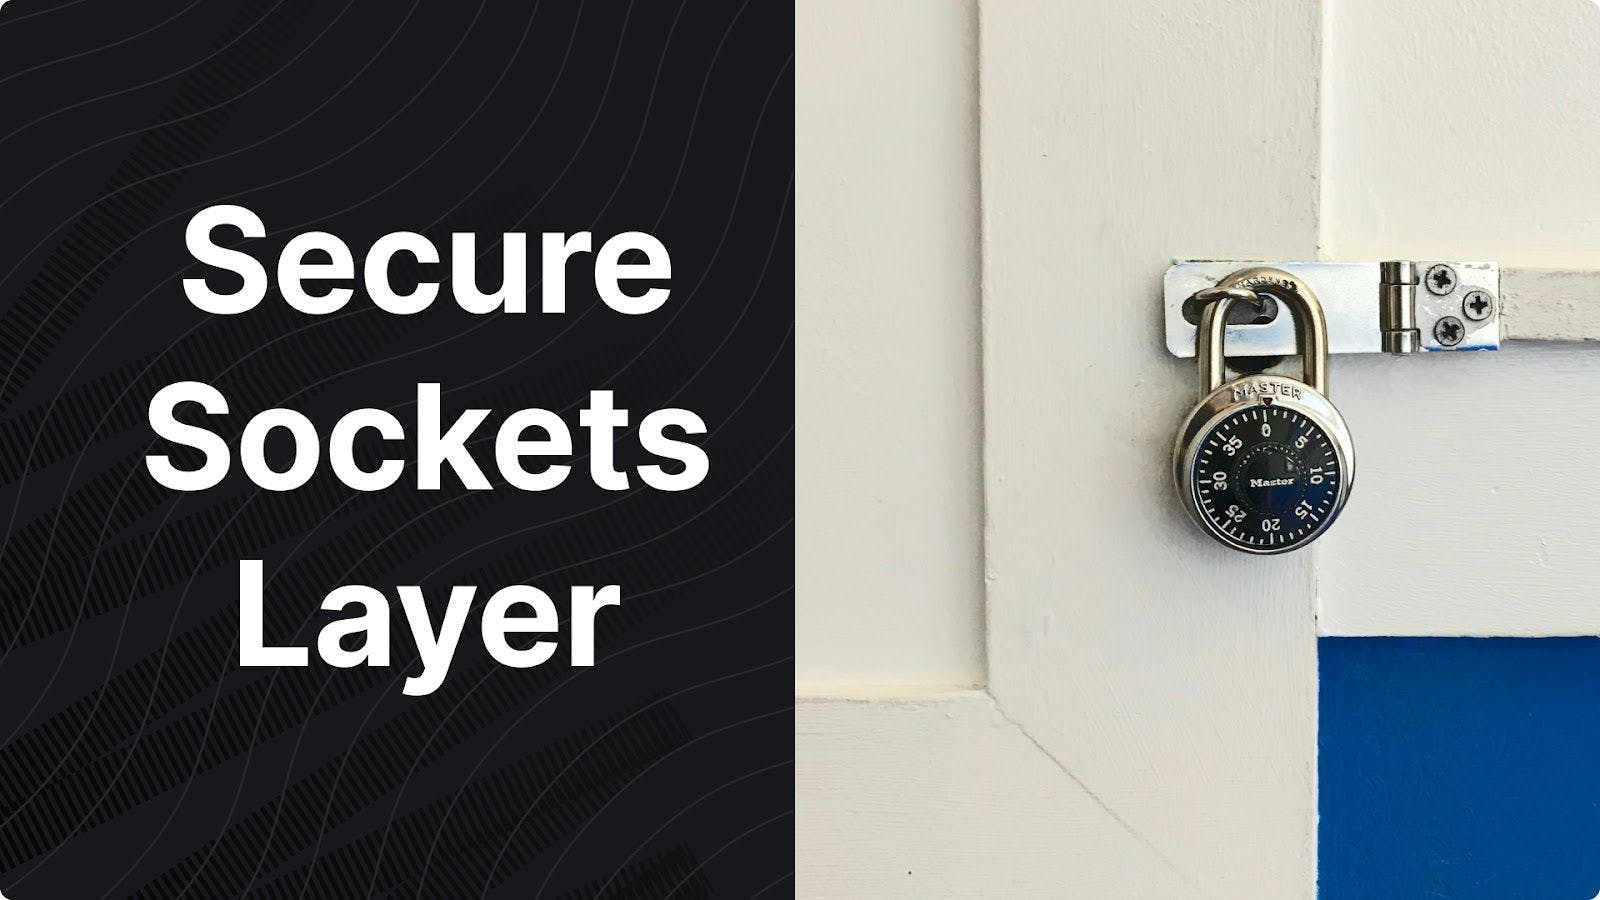 Secure Sockets Layer (SSL) - Ensuring Safe and Trustworthy eCommerce Transactions